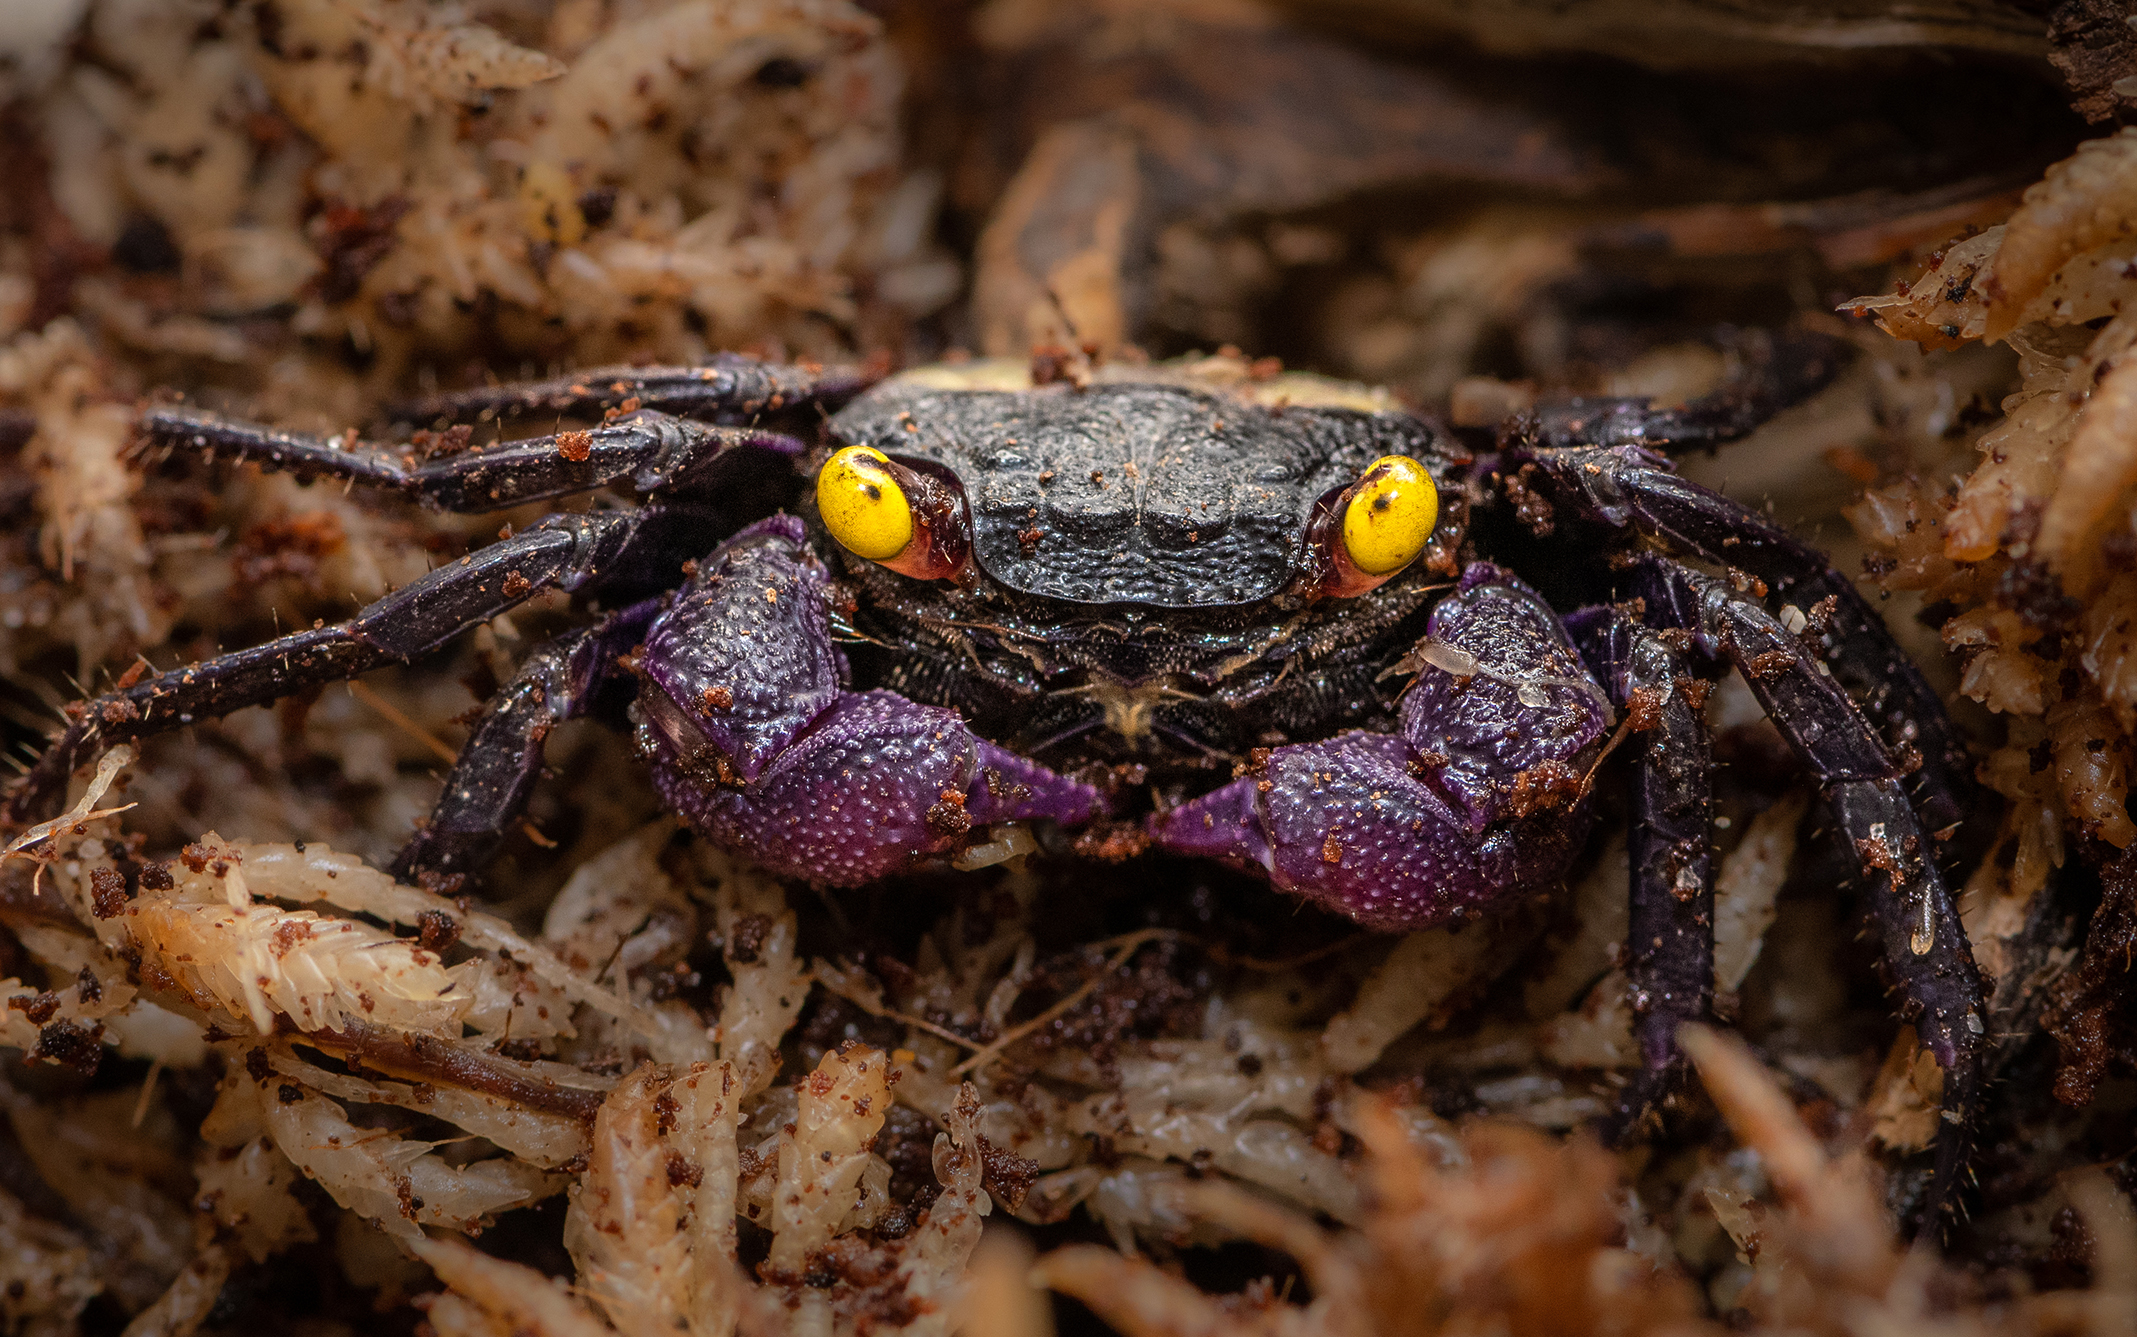 A small reddish crab with bright yellow eyes